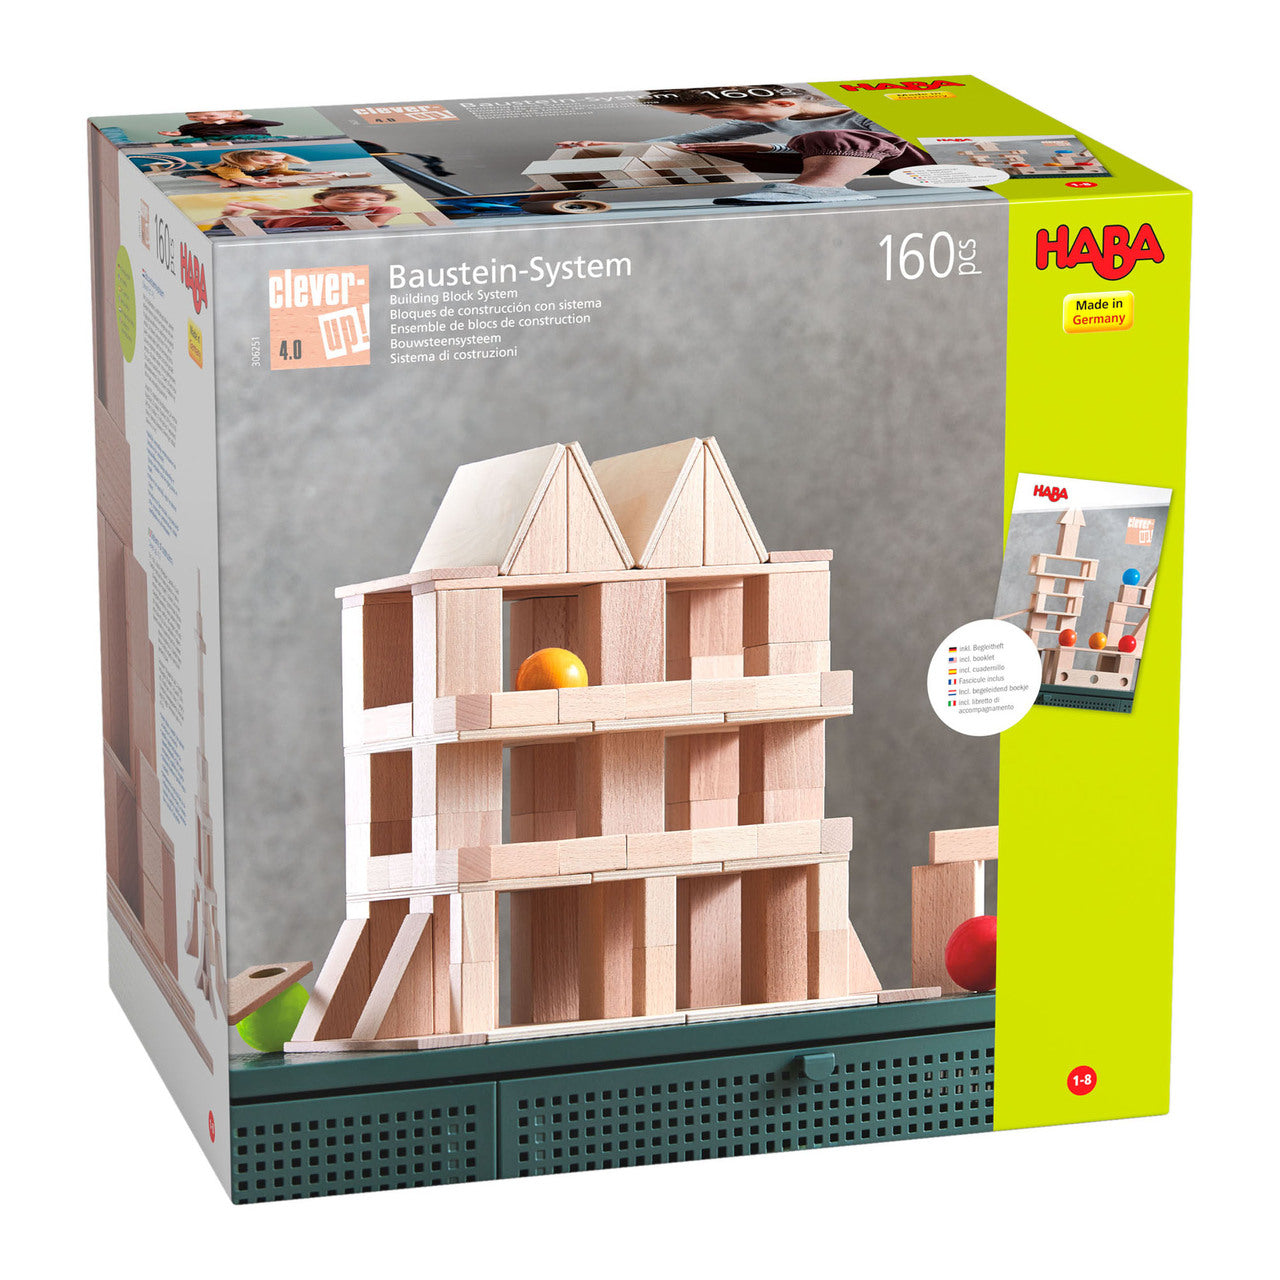 HABA Clever Up! Building Block System 4.0